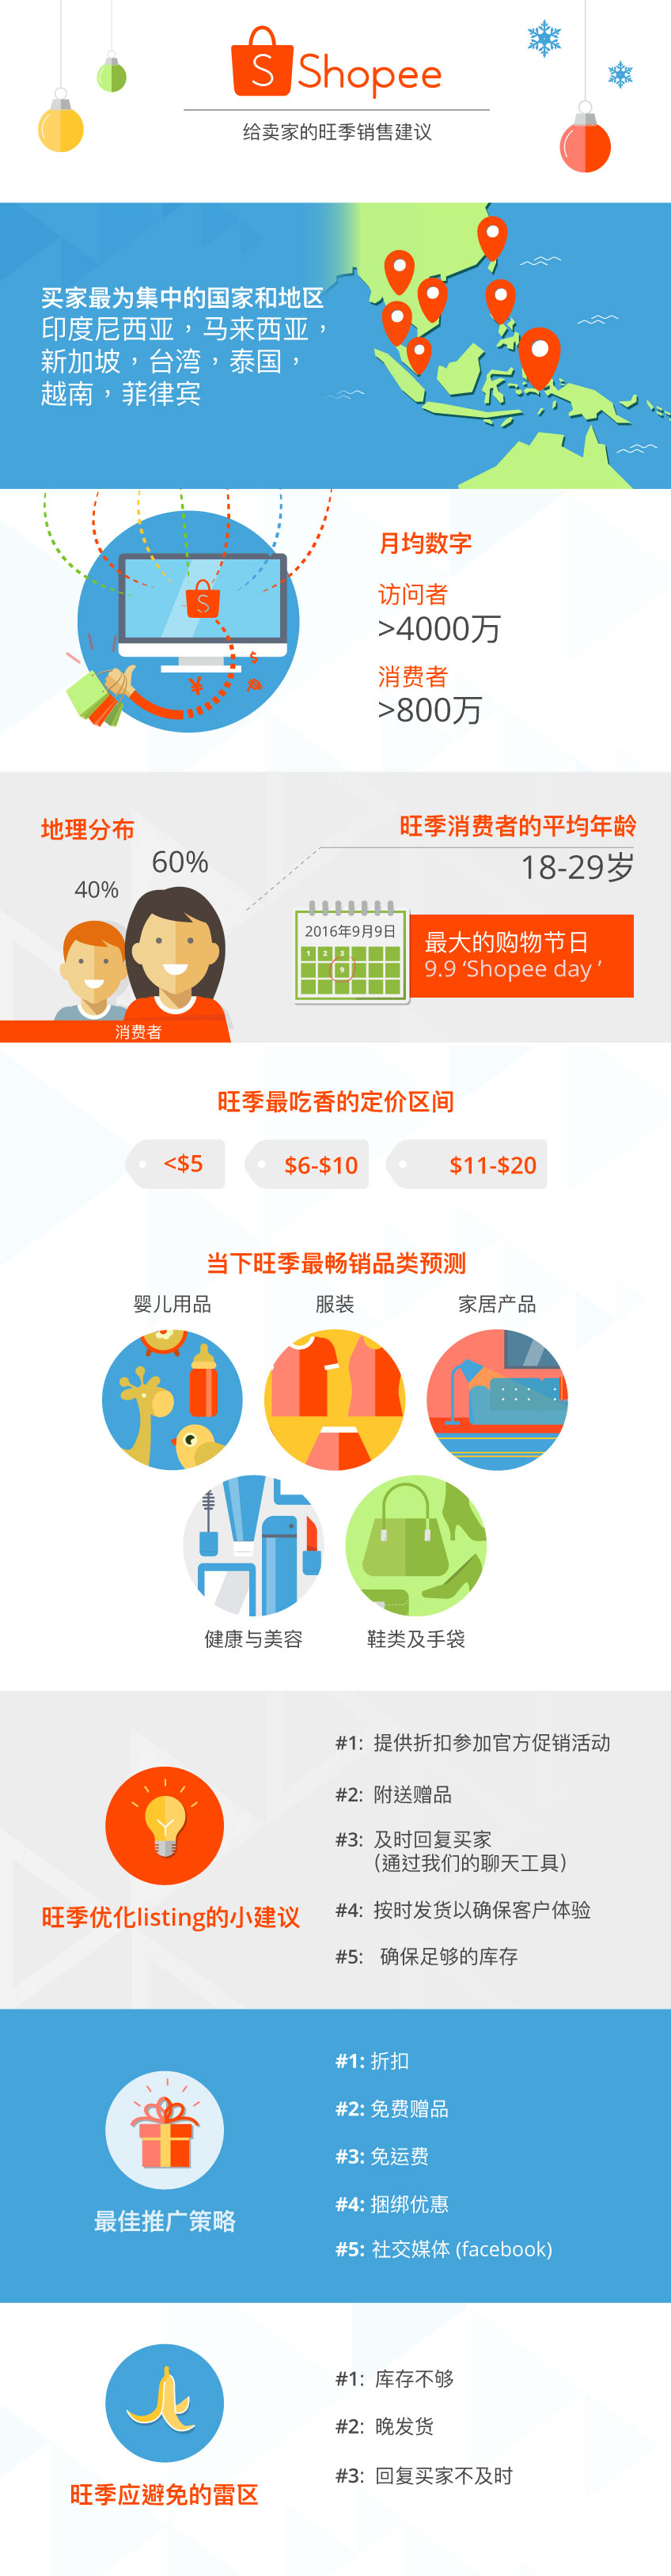 infographic-shopee_dsn62_ch-1